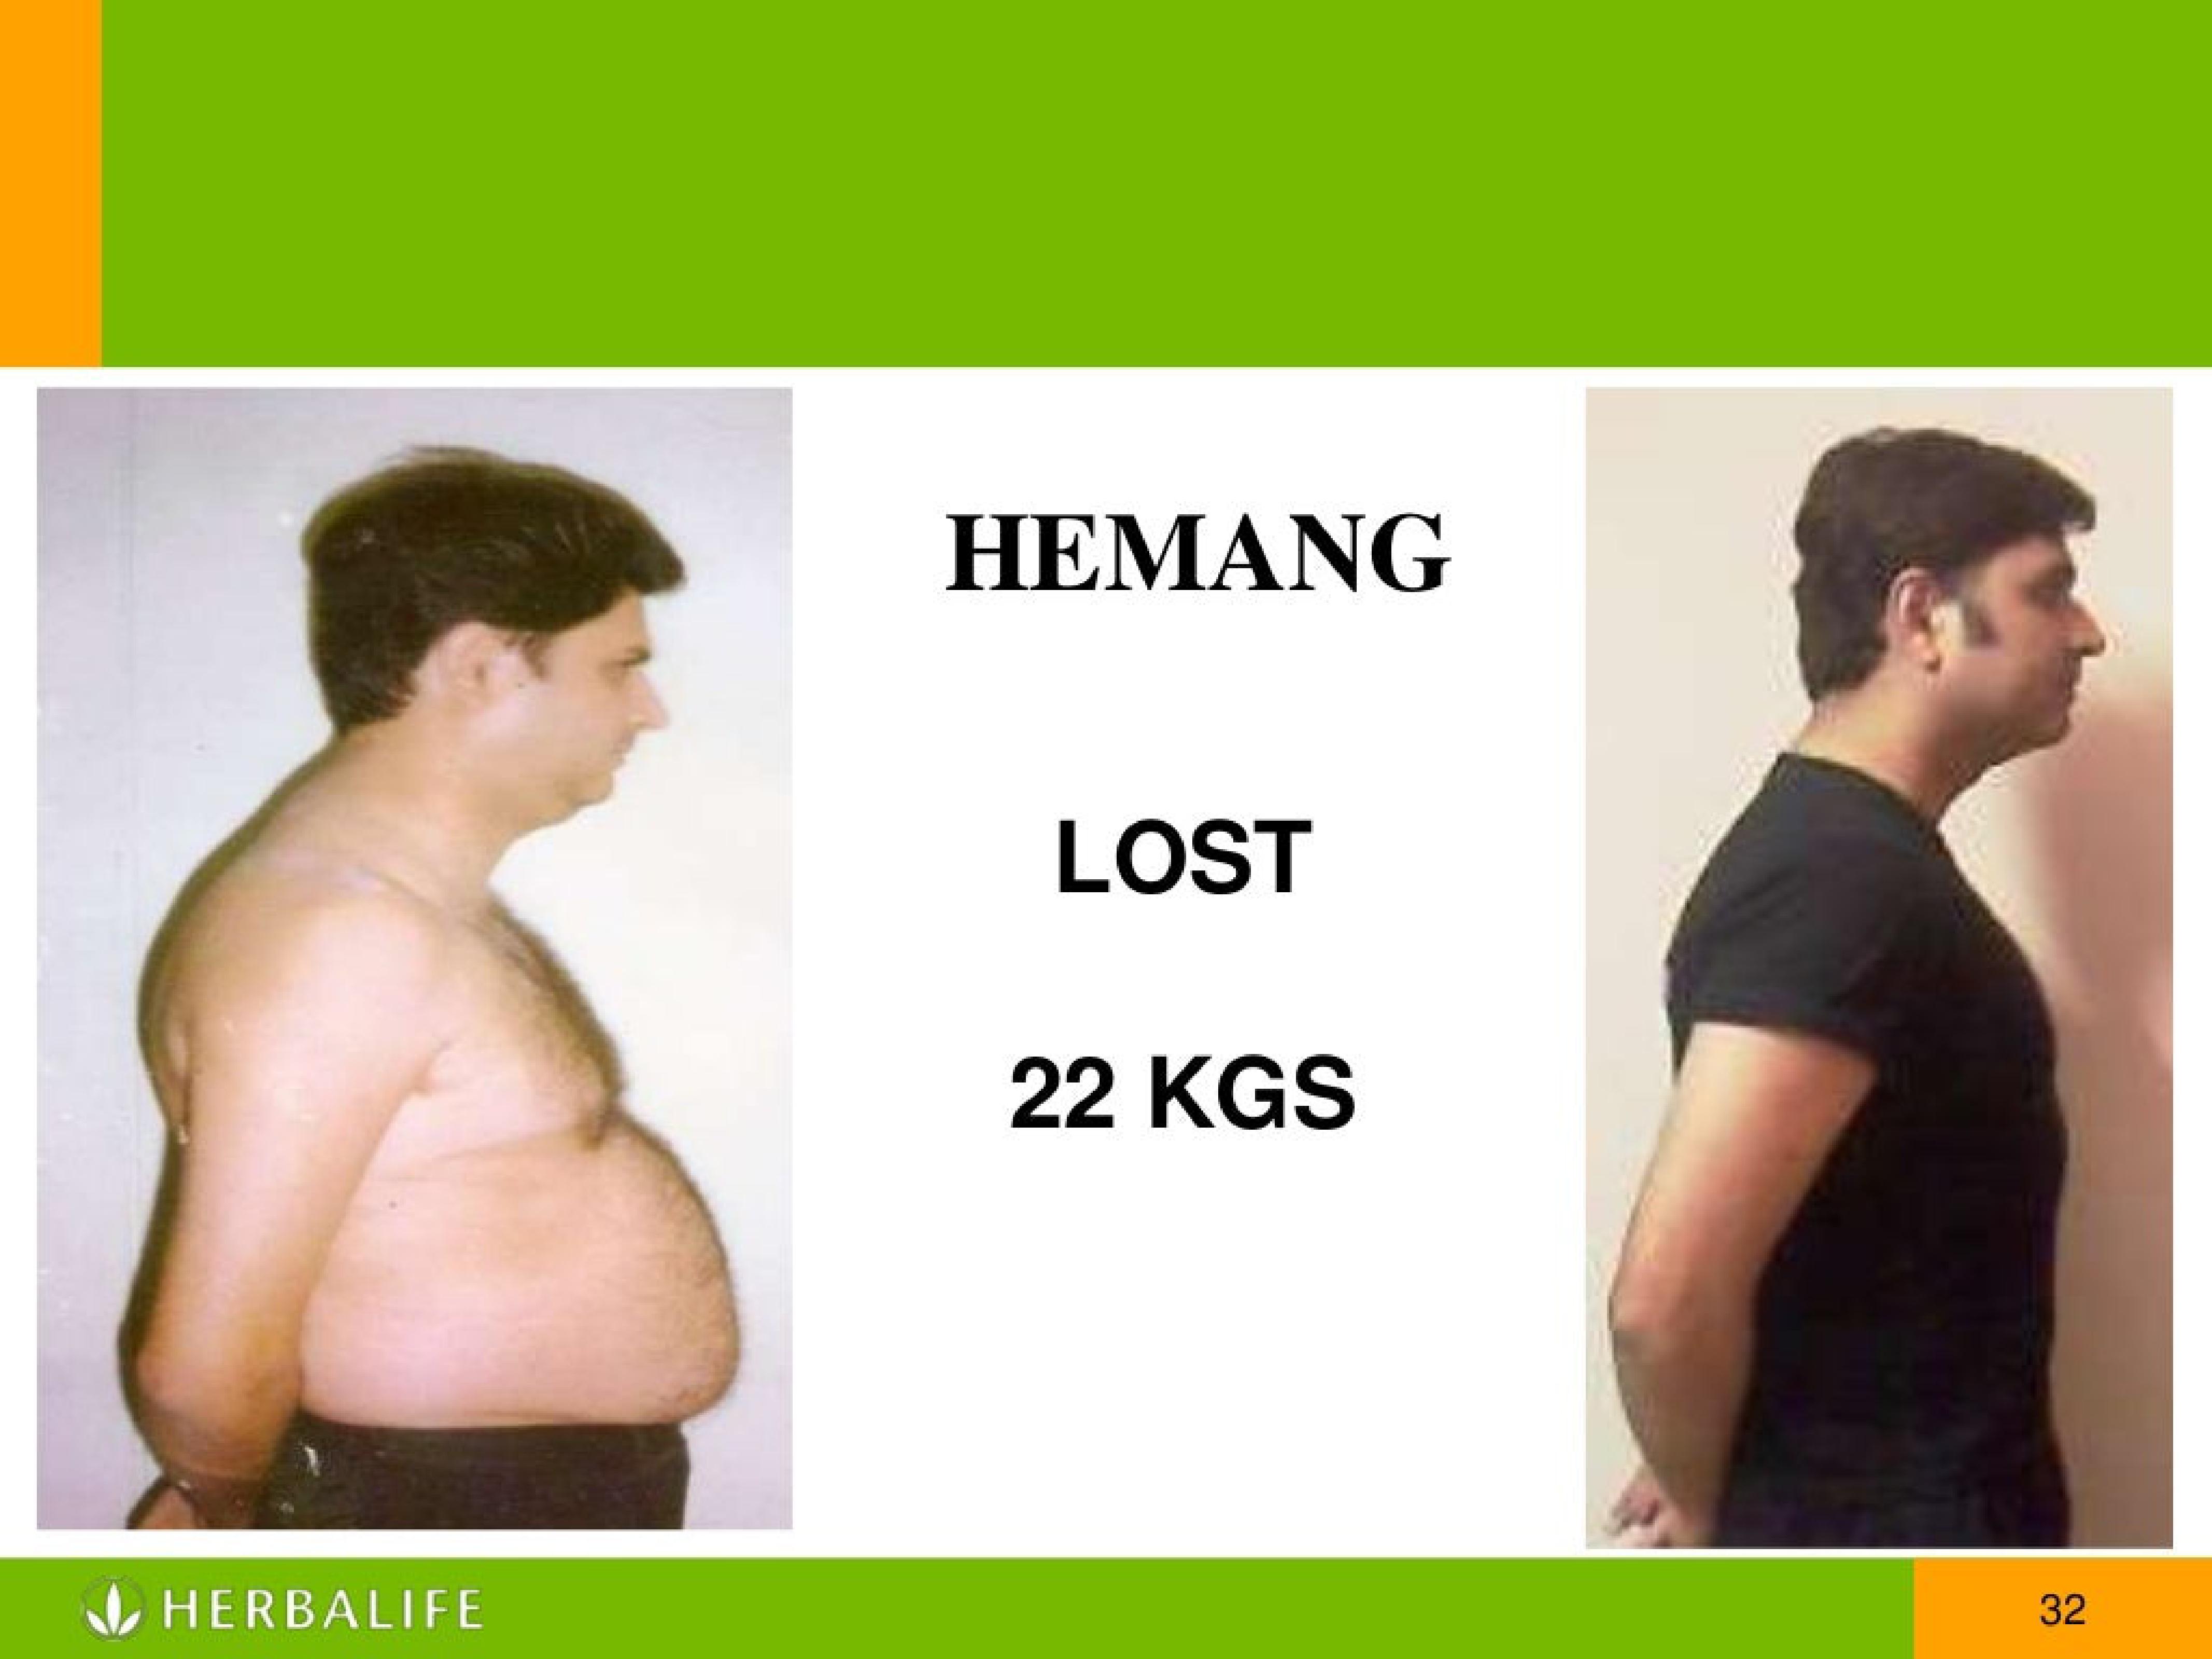 Herbalife SR Nagar Hyderabad 9160255159,Hyderabad,Services,Free Classifieds,Post Free Ads,77traders.com